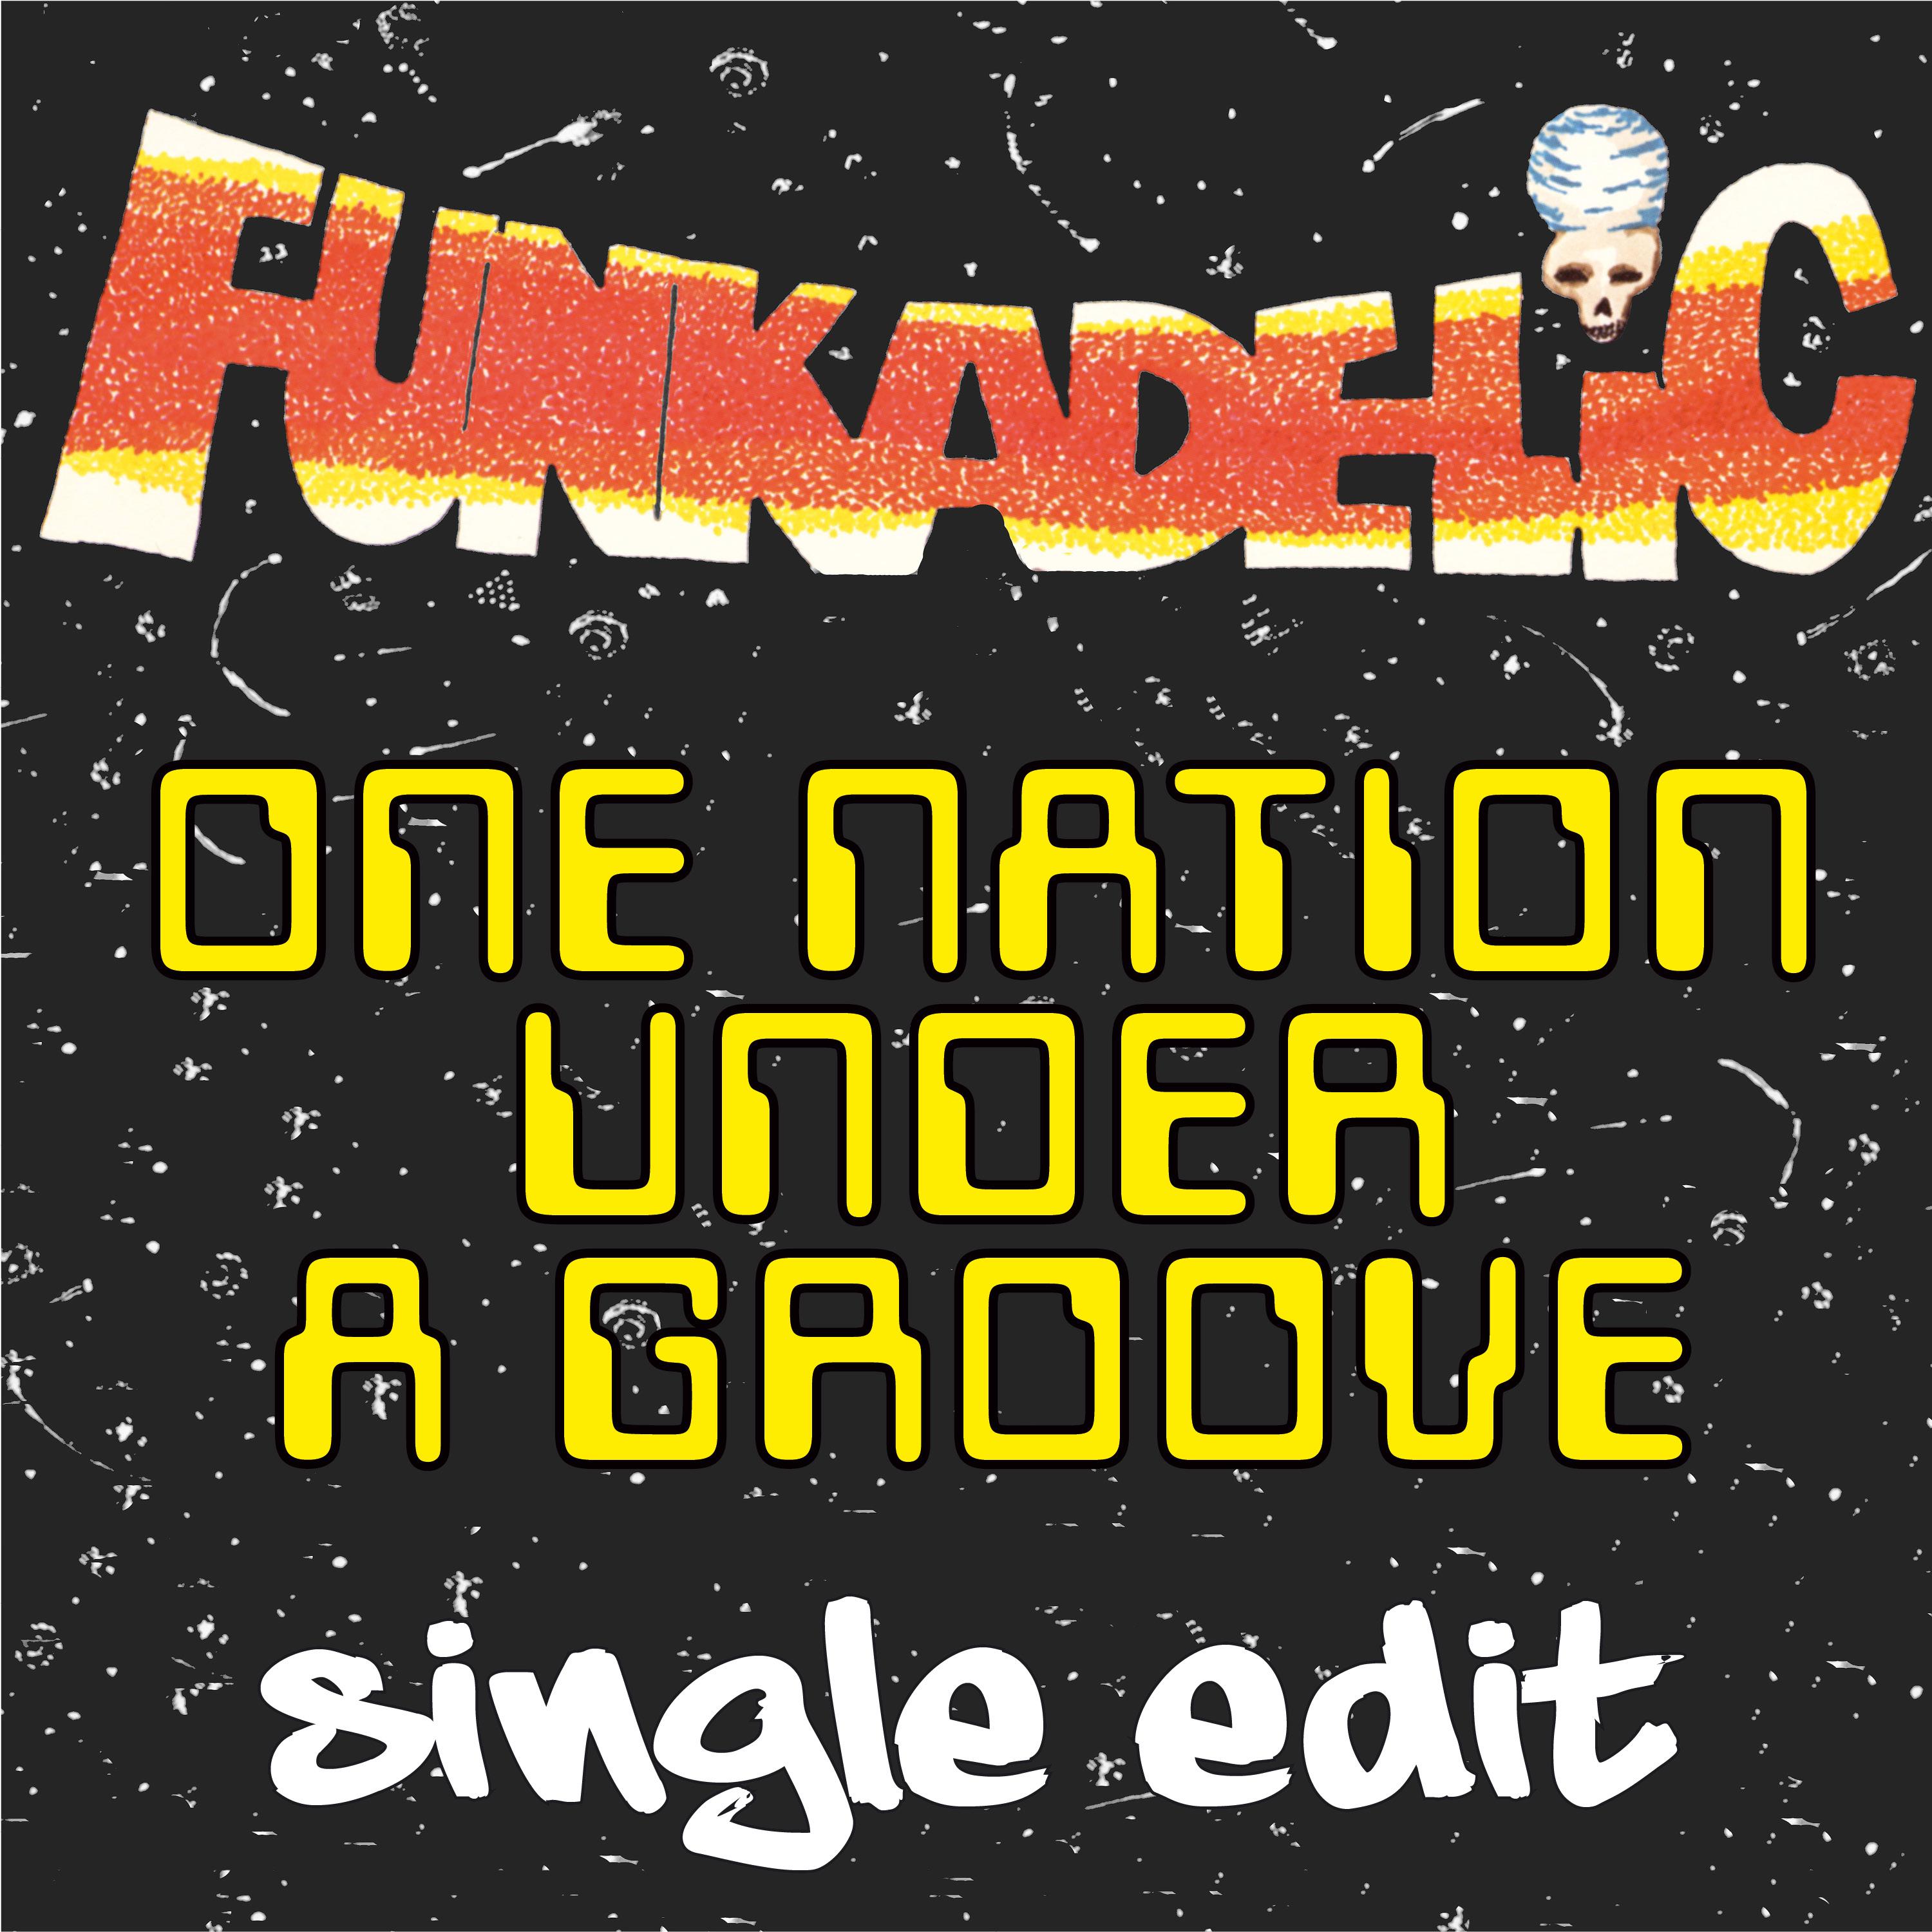 One Nation Under a Groove, Pt. 2 (2016 Remaster)